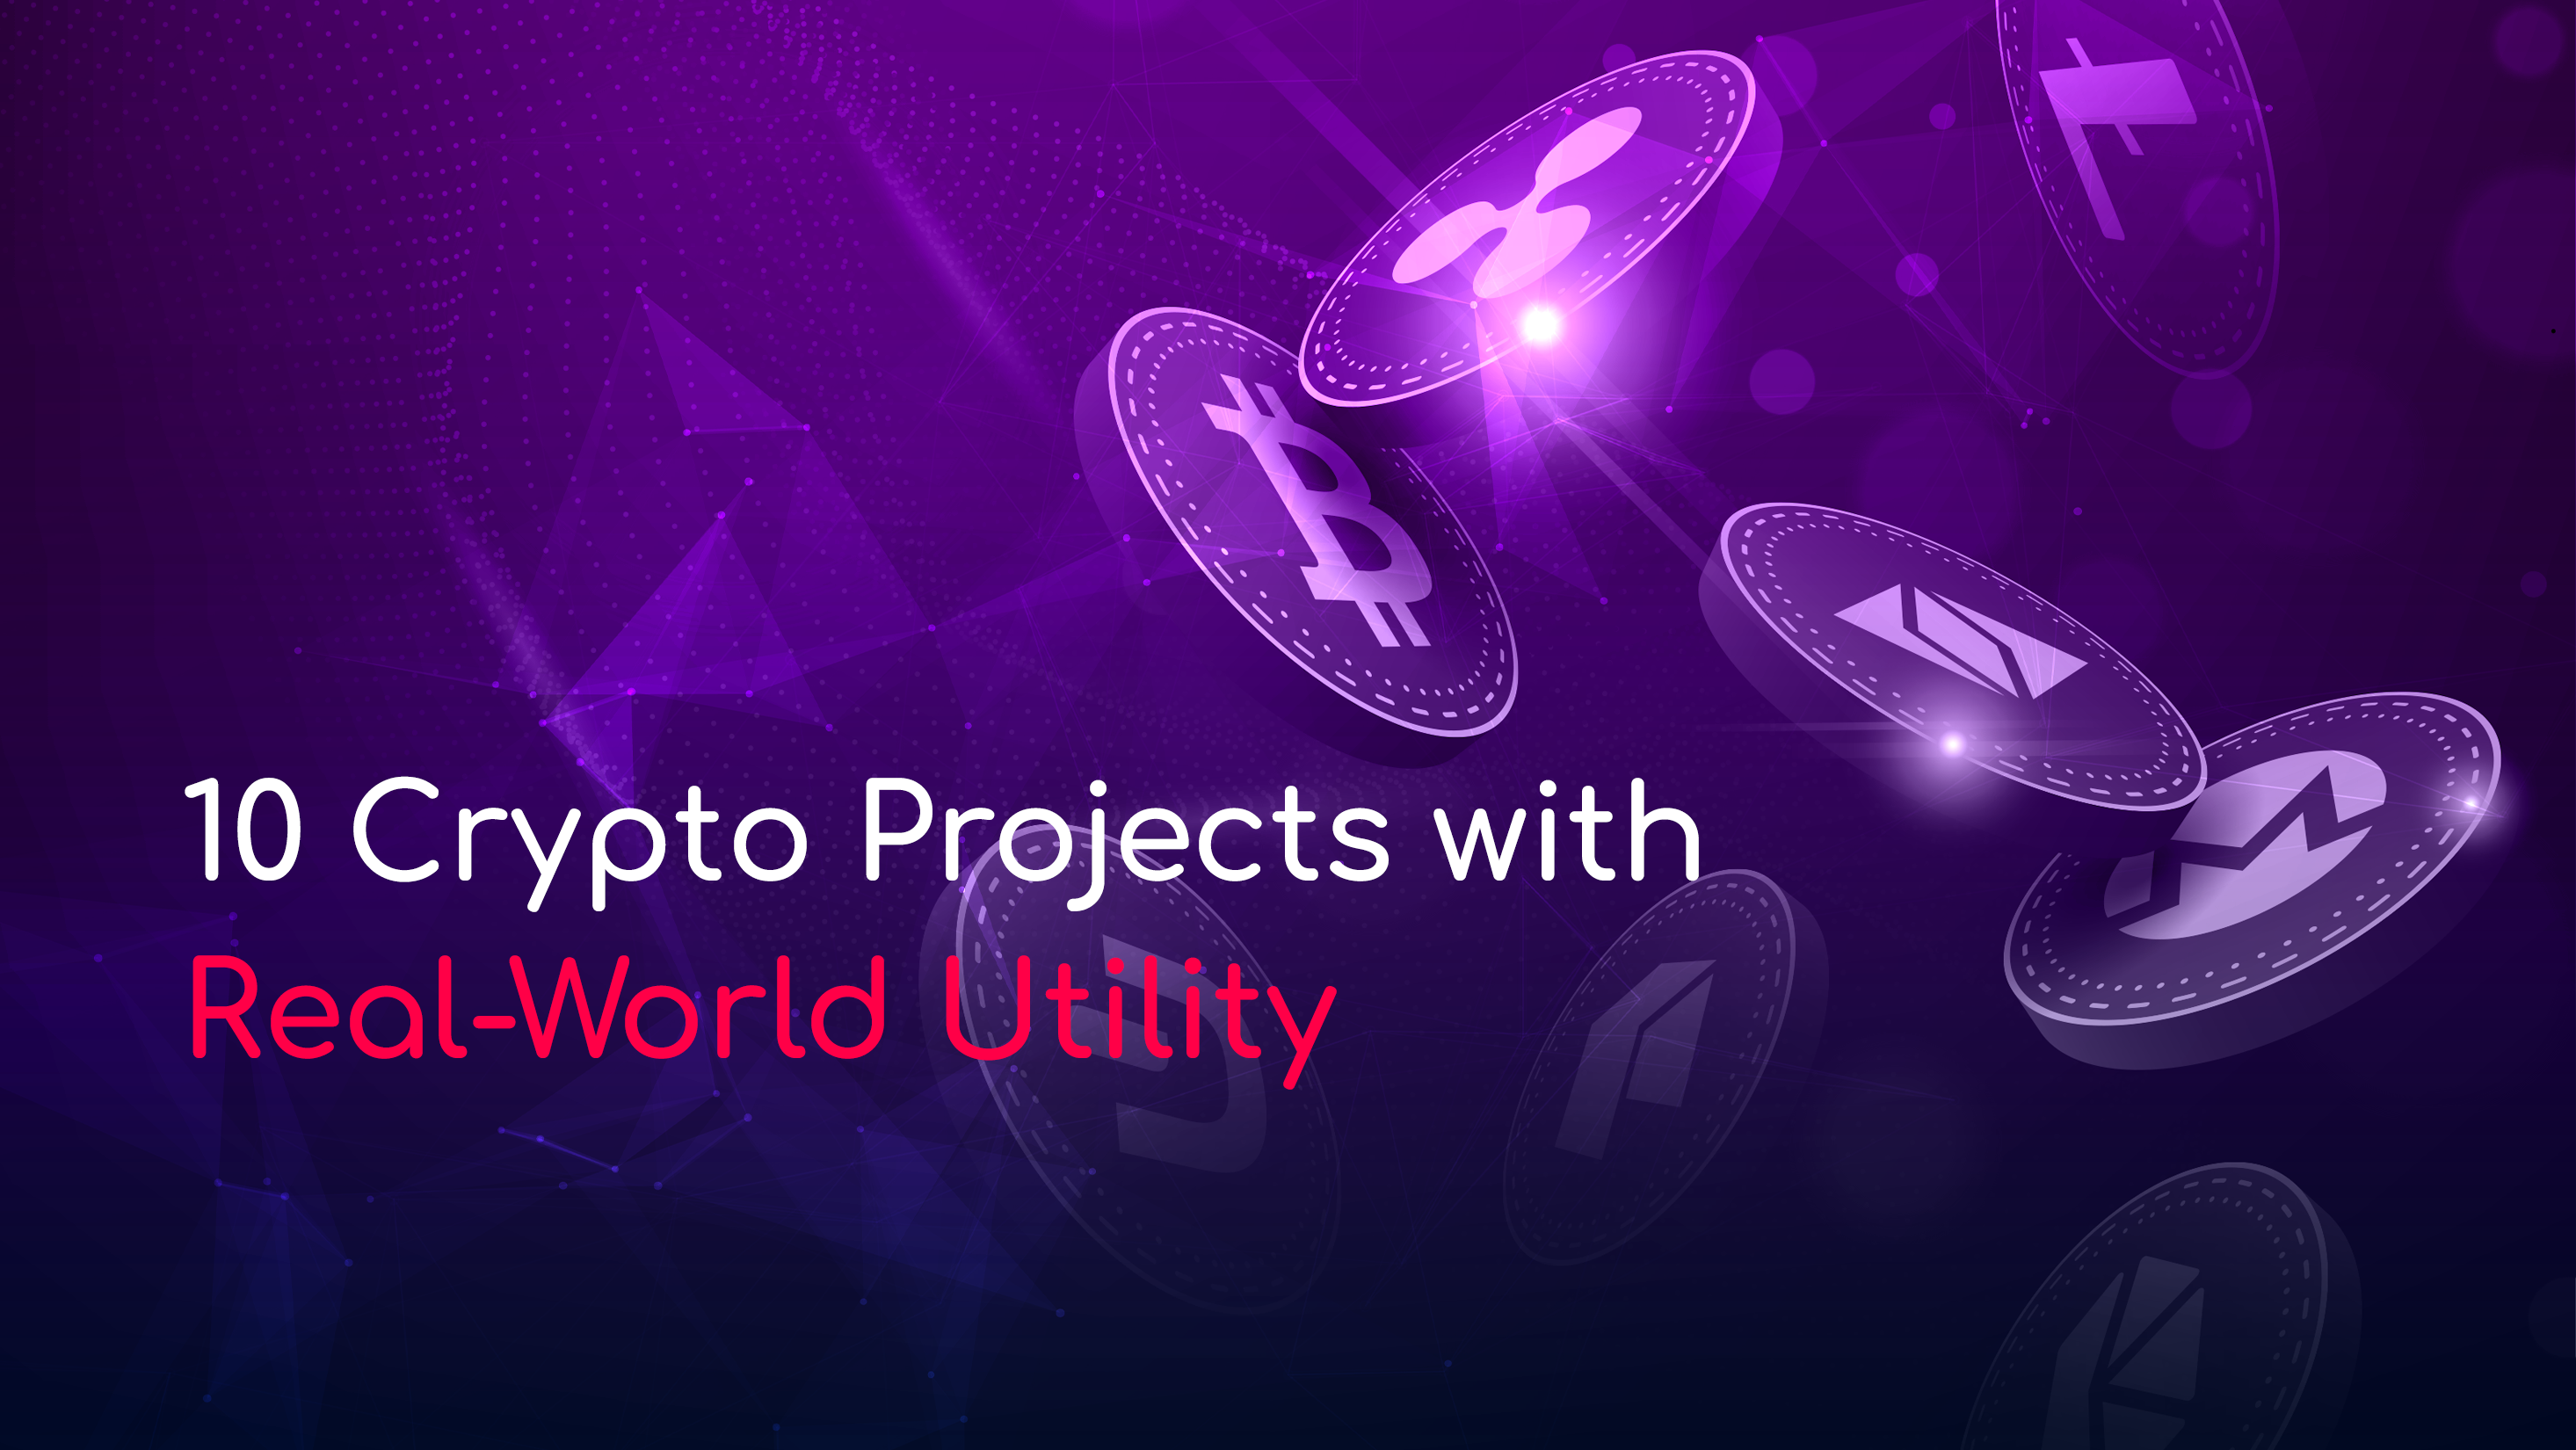 10 Crypto Projects with Real-World Utility